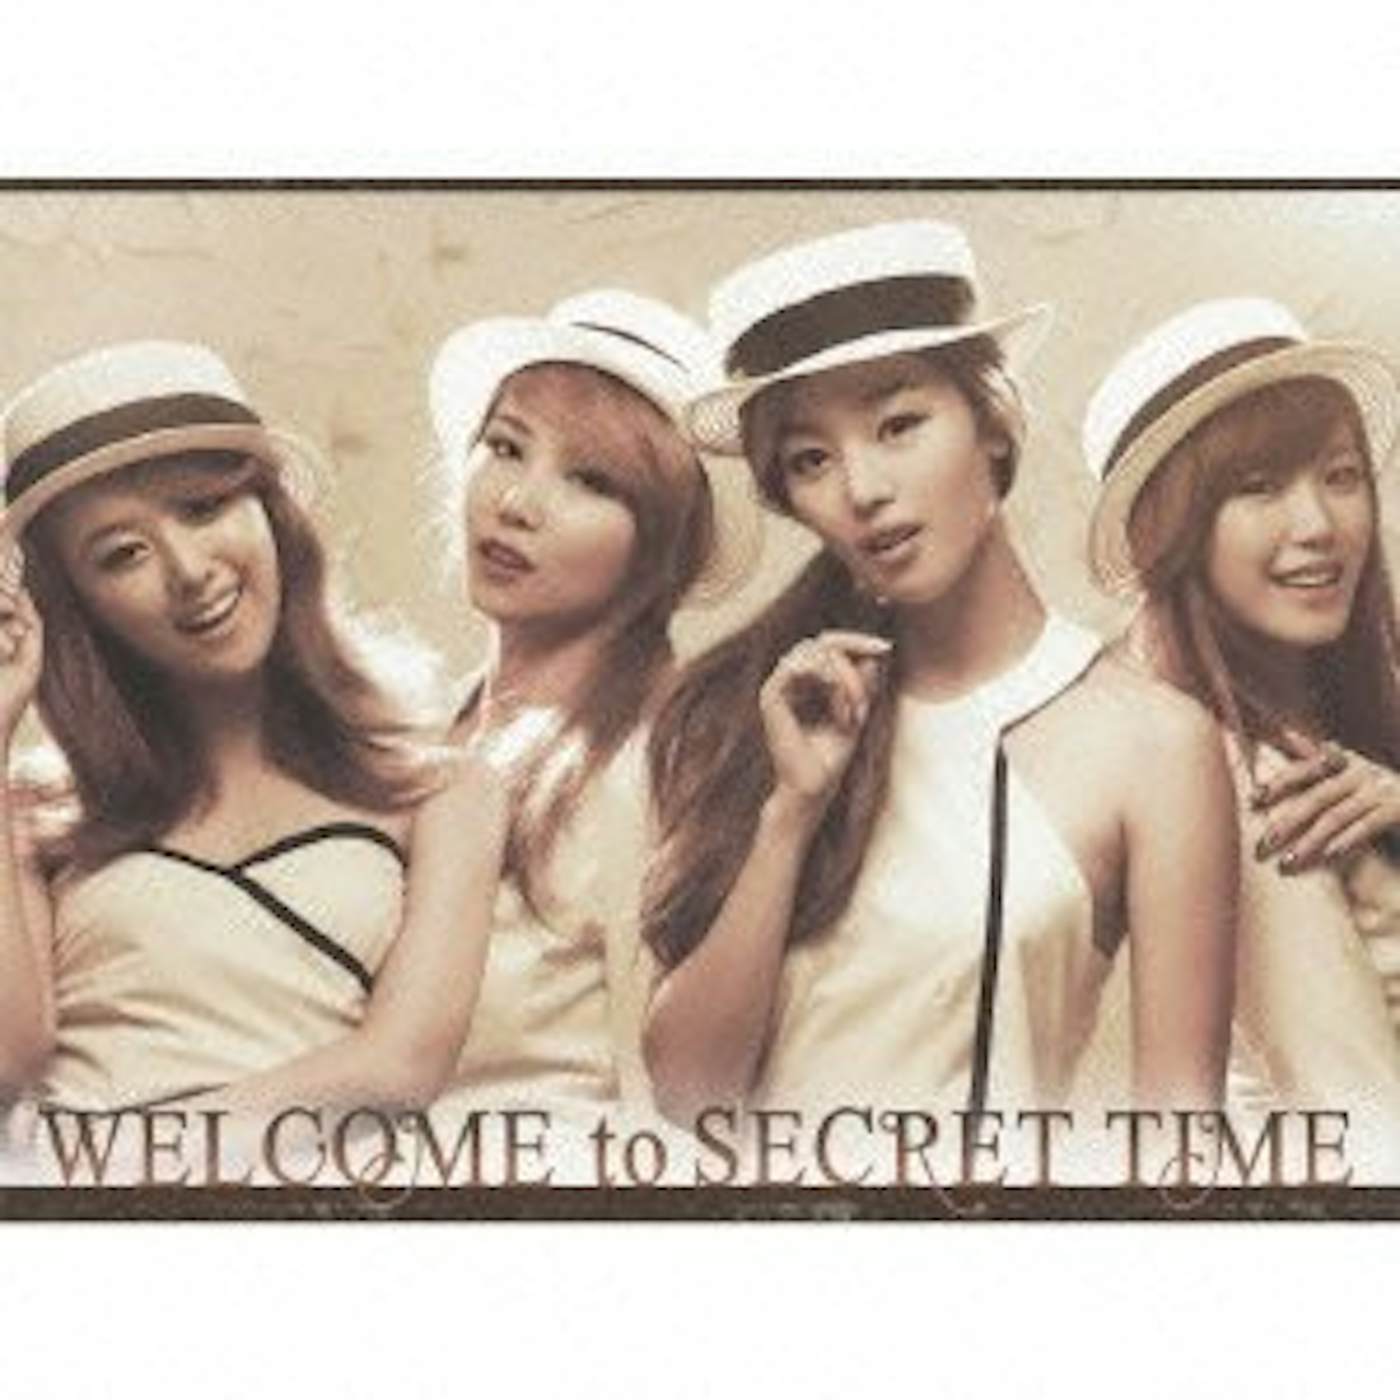 WELCOME TO SECRET TIME (VERSION B) CD